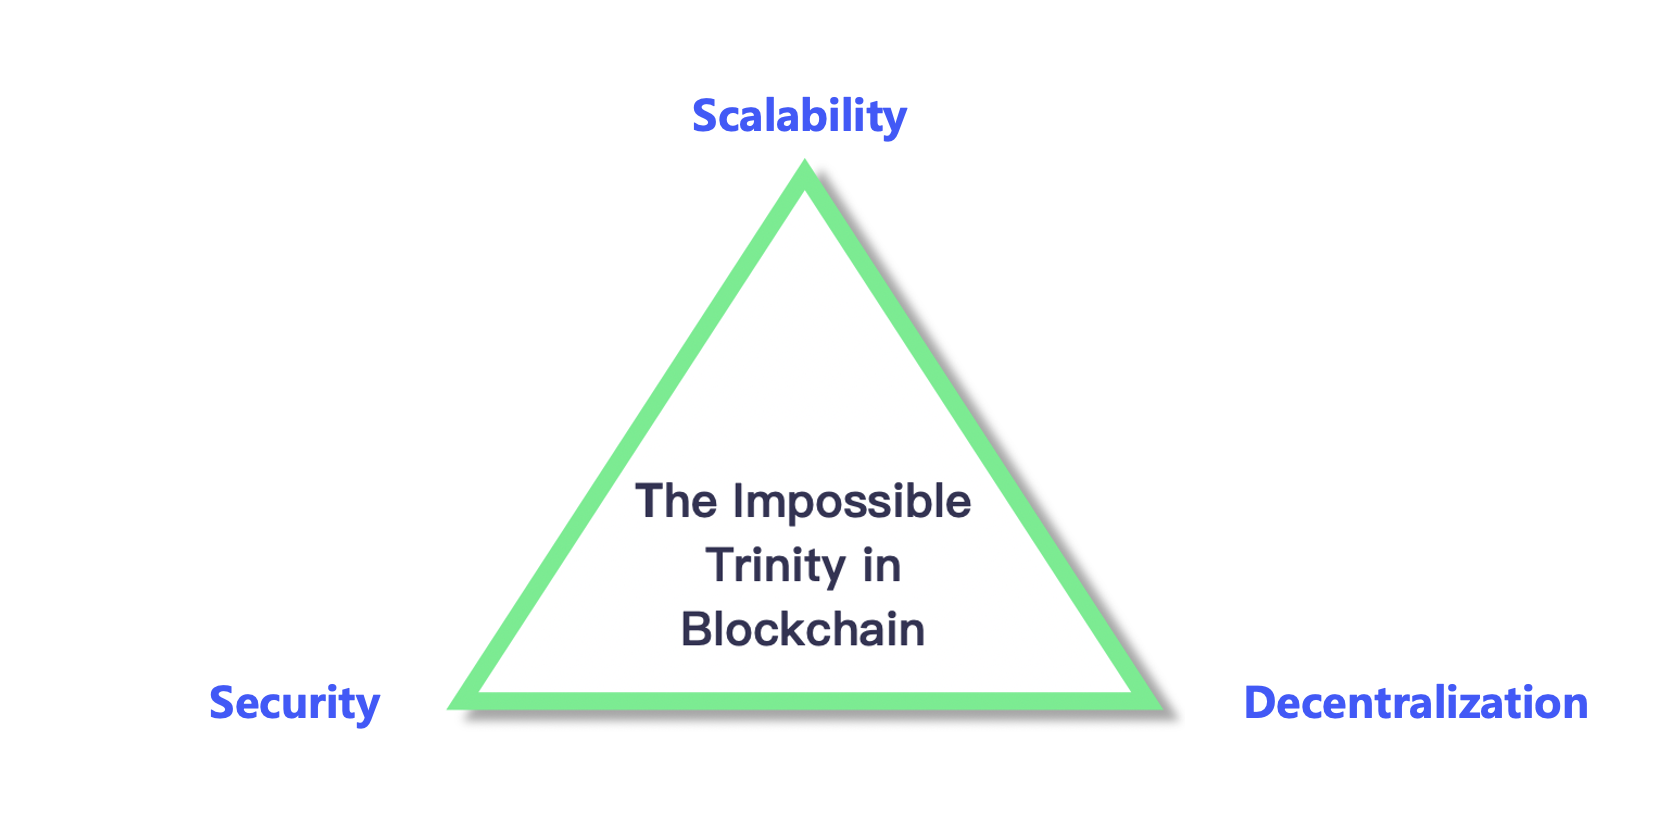 The Impossible Trinity in Blockchain